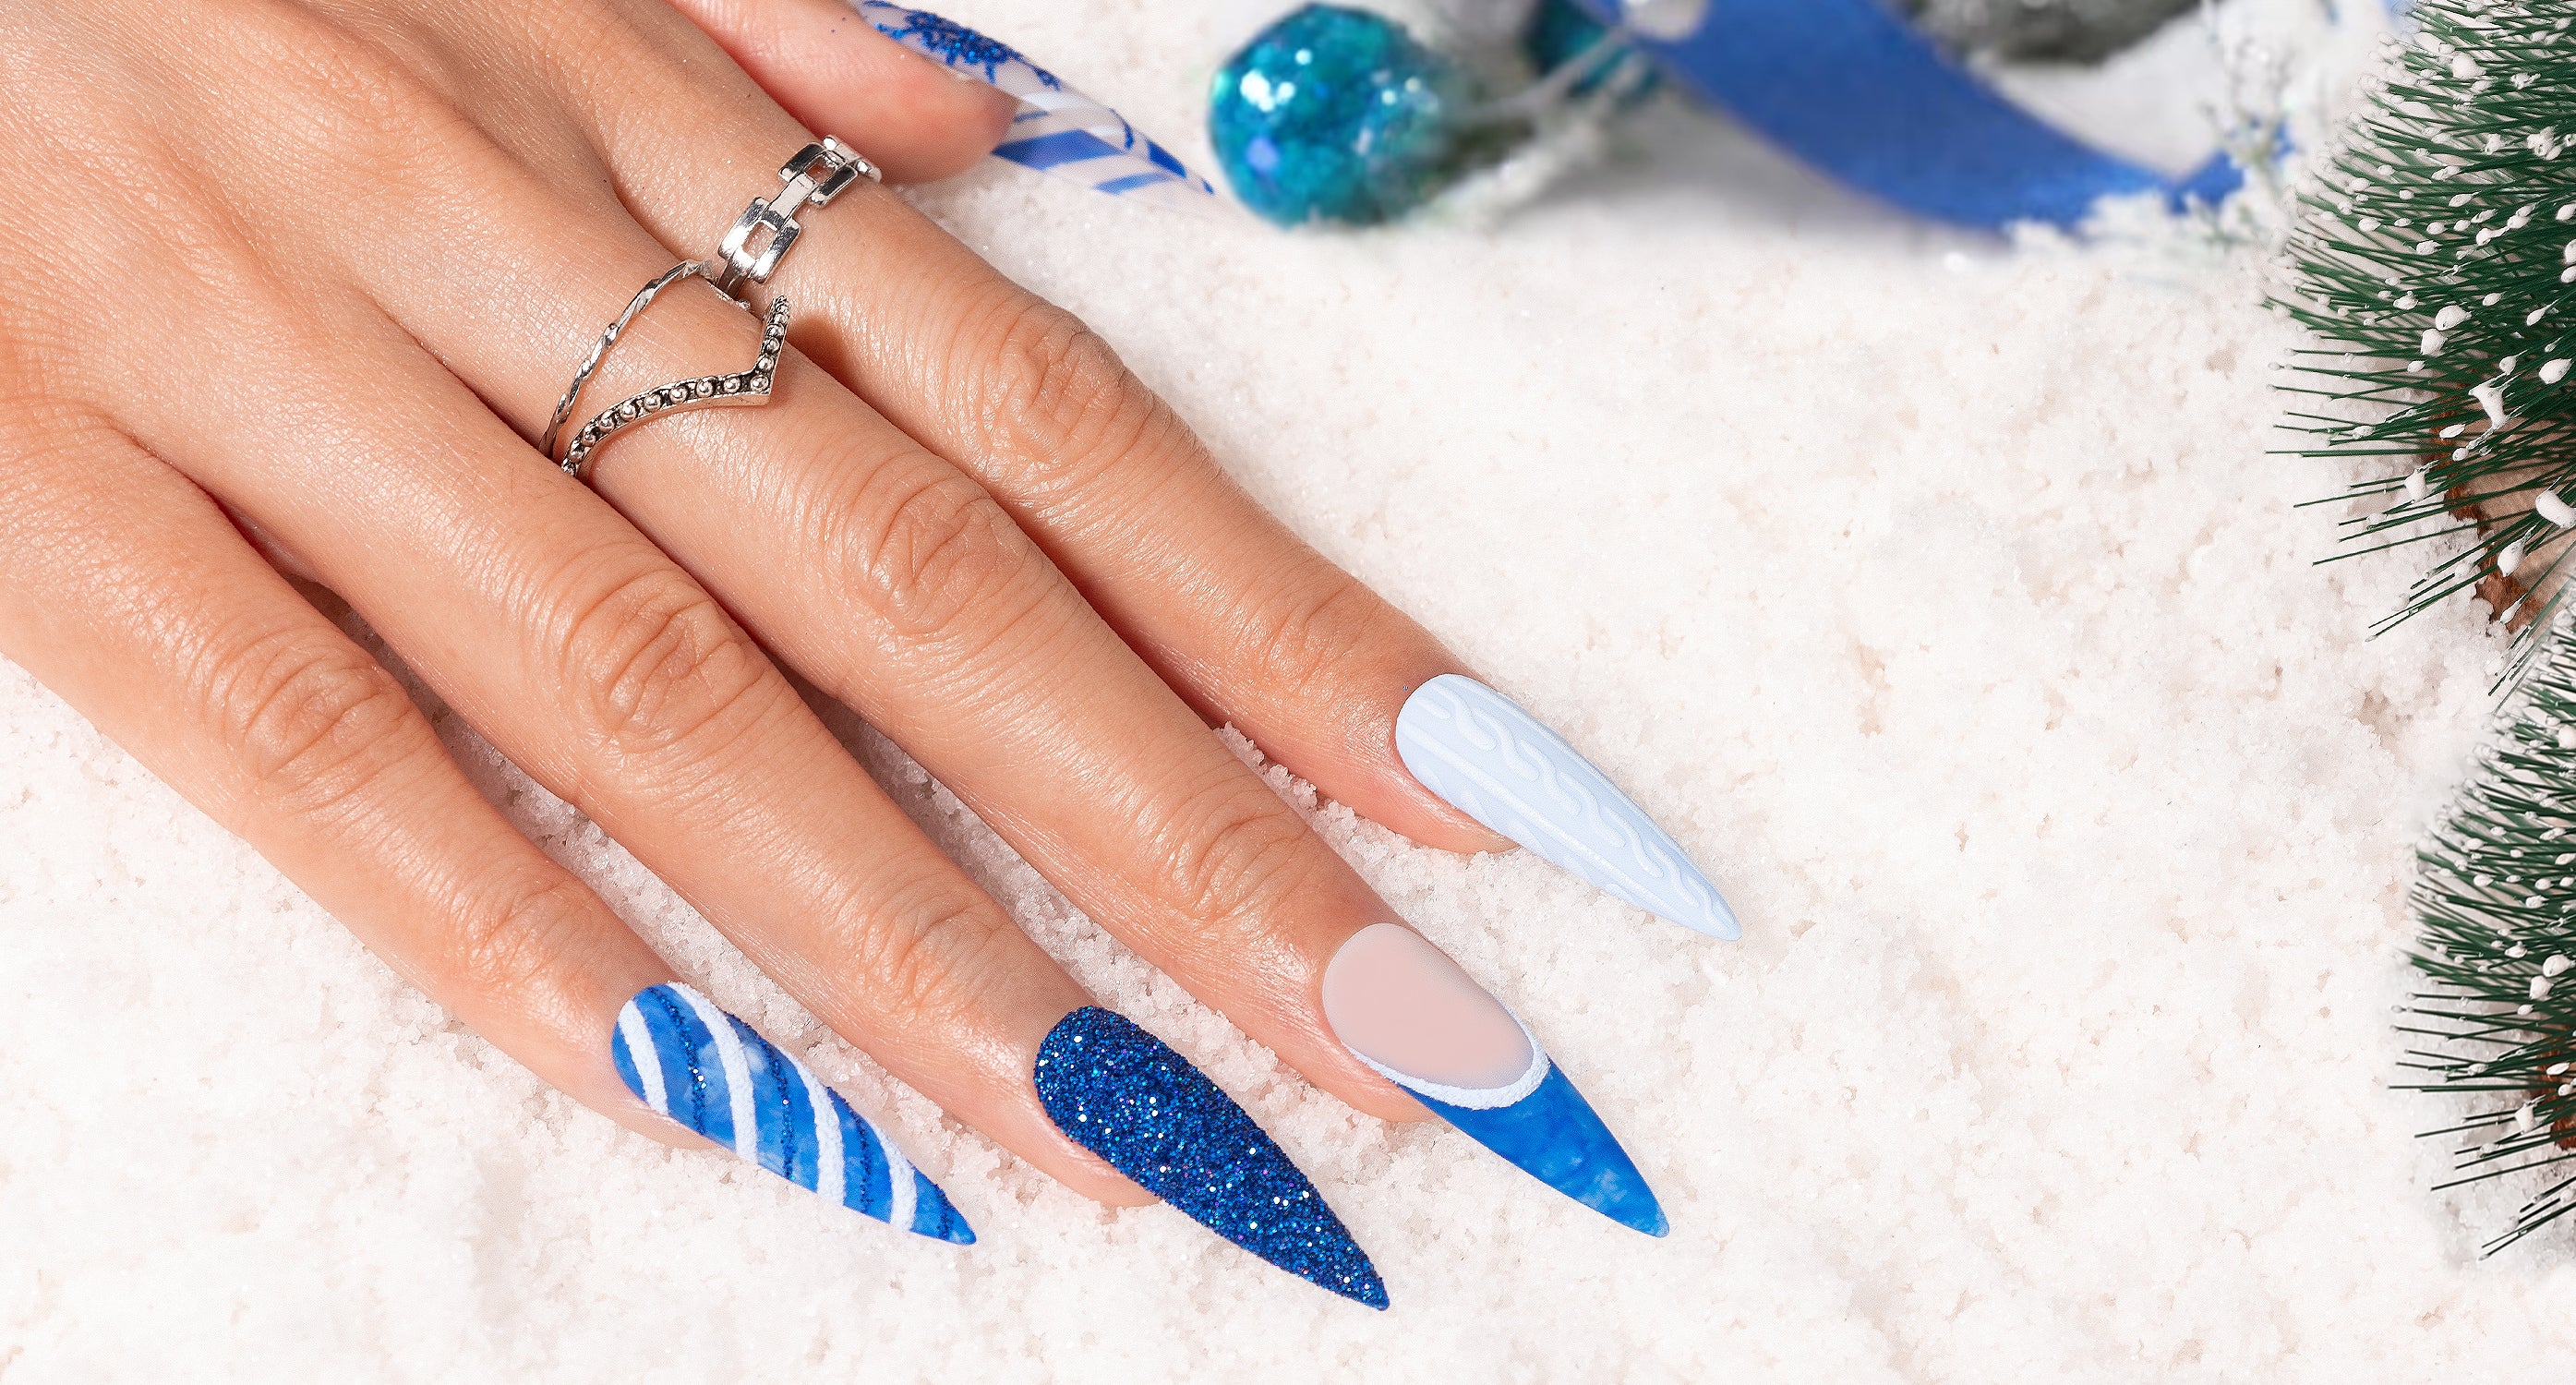 Gorgeous nail art designs to try this winter [PHOTO]